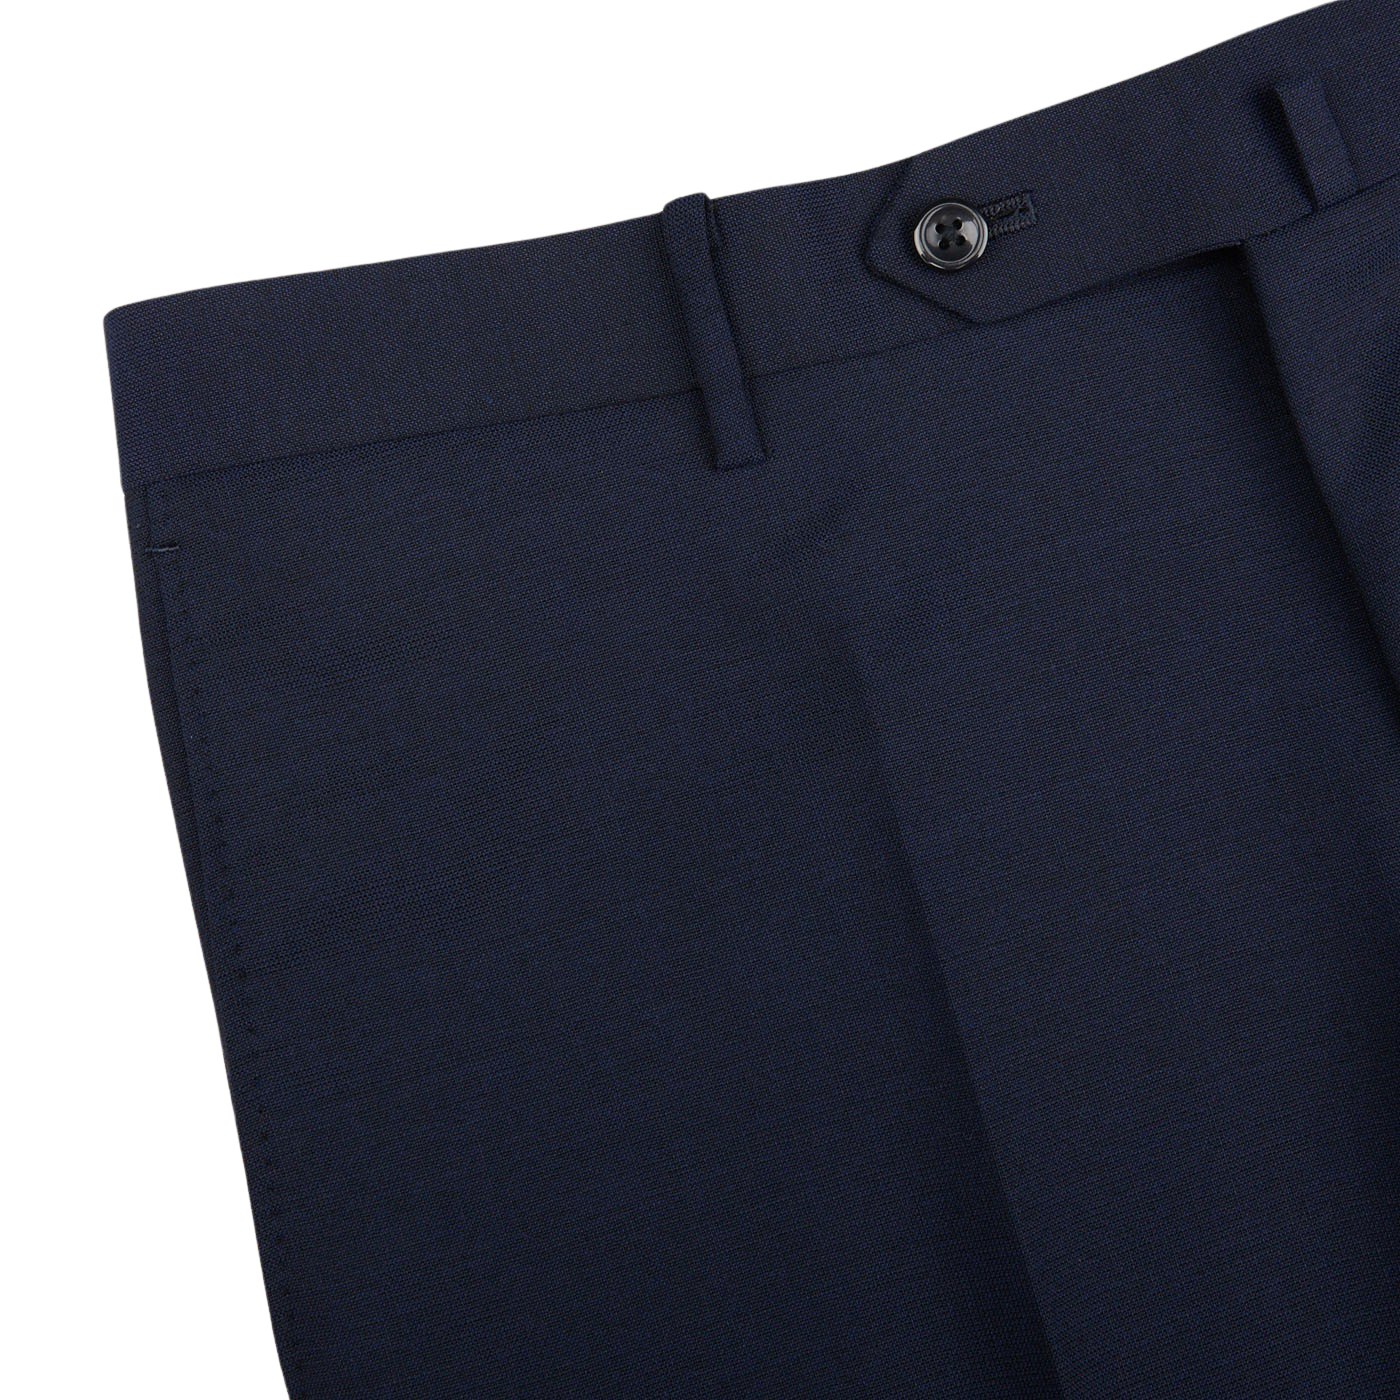 Close-up view of Ring Jacket navy blue high twist wool suit pants featuring a button closure and tailored details on a light background.